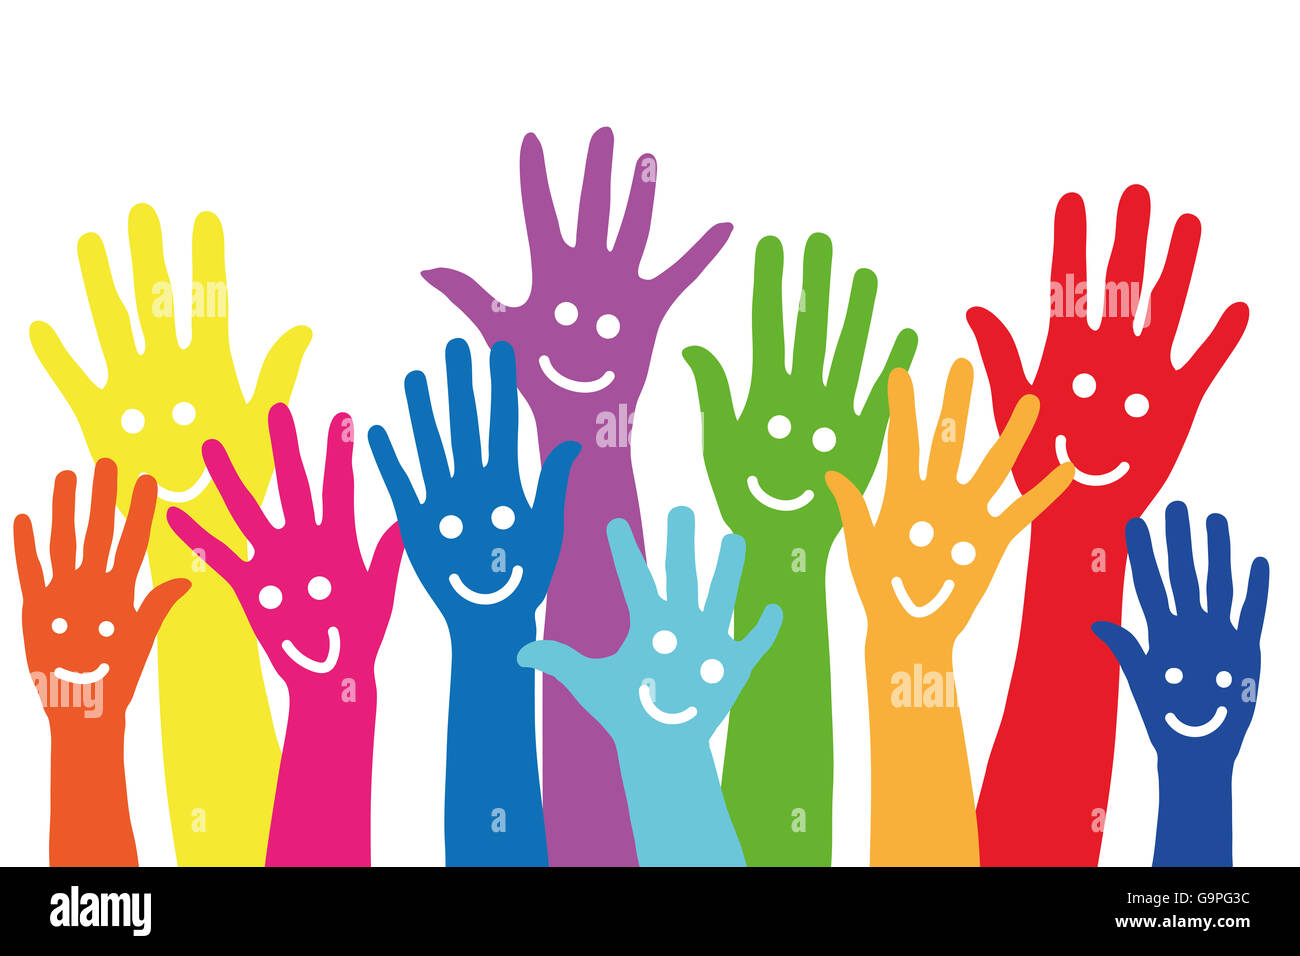 Background with many different colorful hands with smileys on it Stock Photo